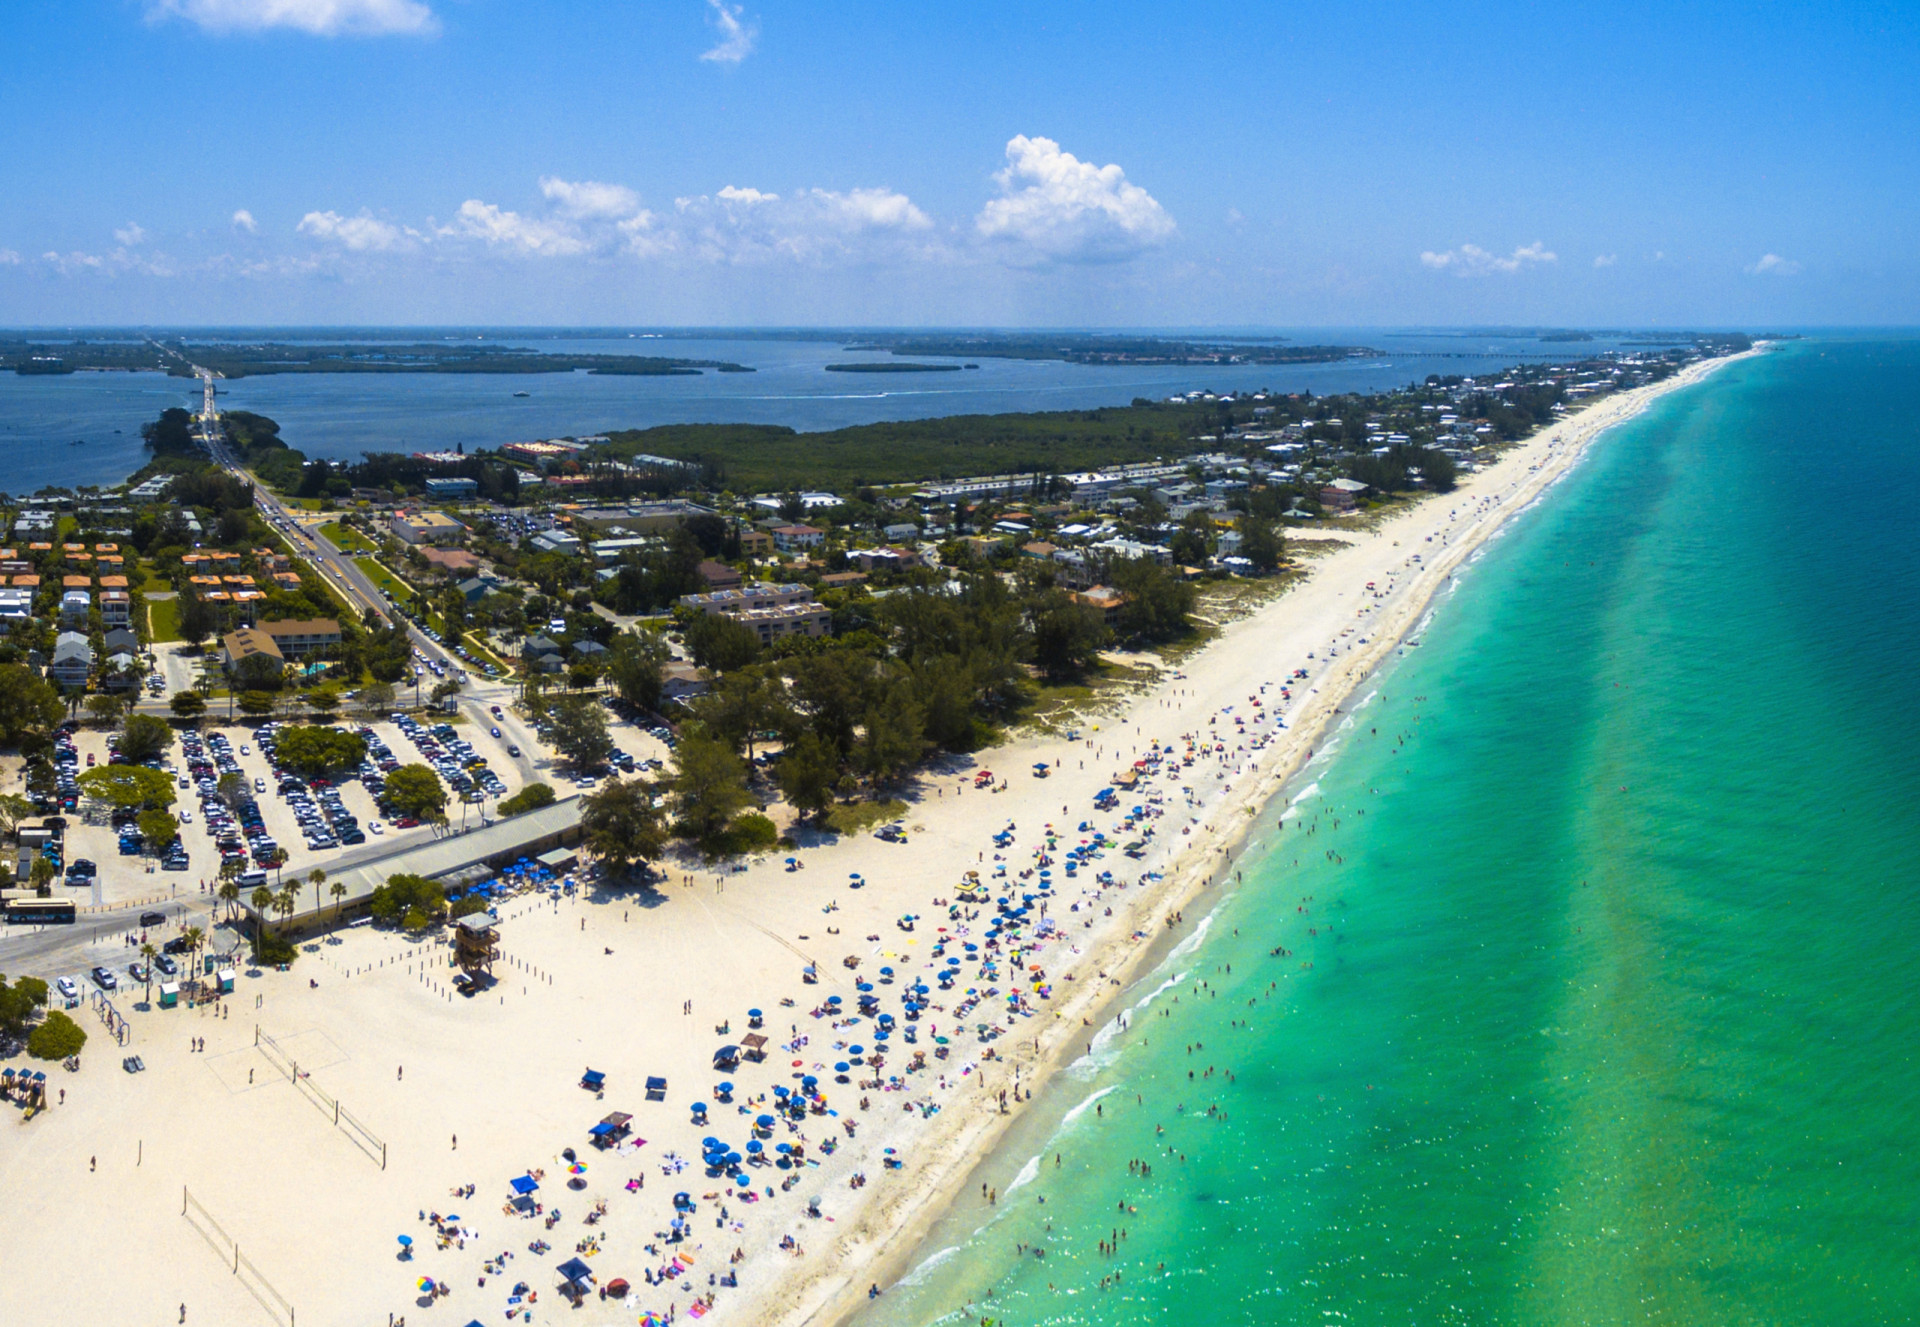 <p>Beach vacation destinations to seek out in 2024 include Anna Maria Island, on Florida's Gulf Coast. Unlike many of the state's tourist brochure beaches, Anna Maria's broad expanse of sand is still very much under the radar. Pine Avenue, the island's main thoroughfare, is lined with affordable shops, galleries, and eateries.</p>